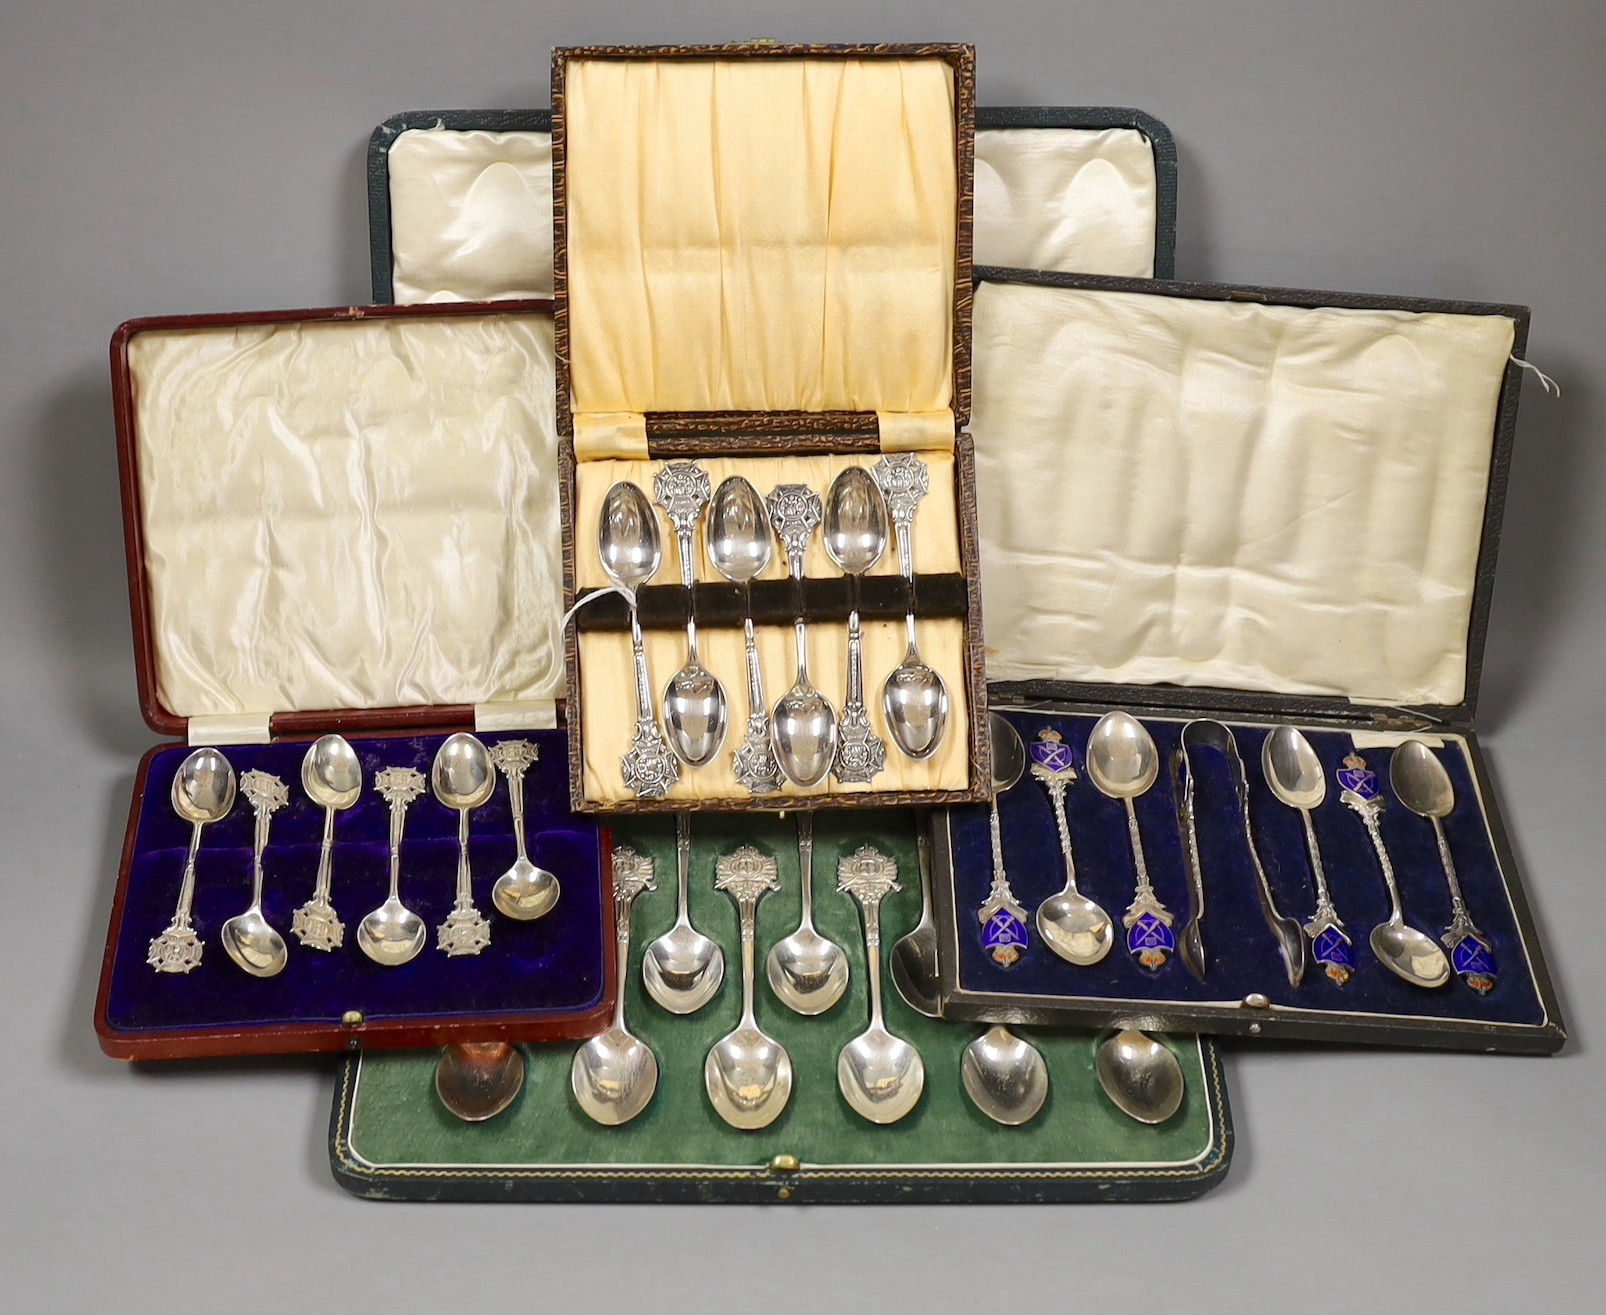 Rifle trophies: a cased set of twelve spoons, two cased sets of silver spoons and a cased set of six plated spoons